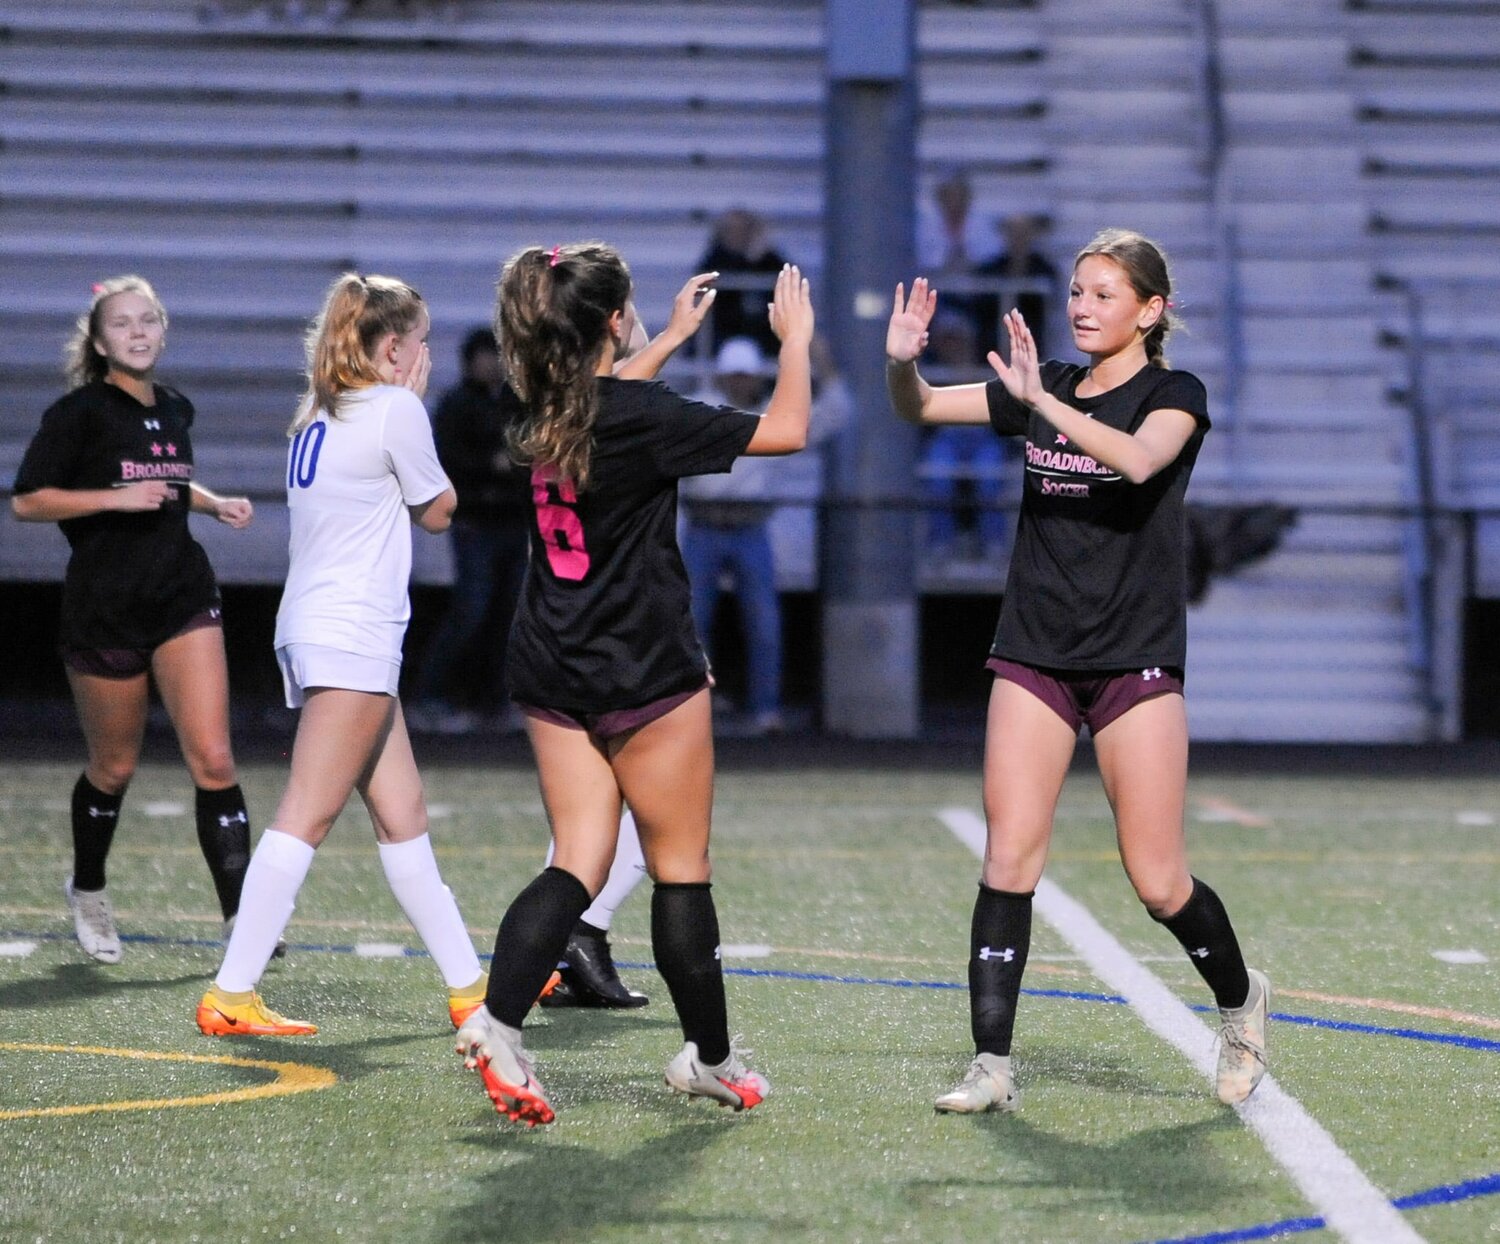 Grace Gartrell (6) and Mia Orso celebrated Orso’s free kick goal that opened the scoring.